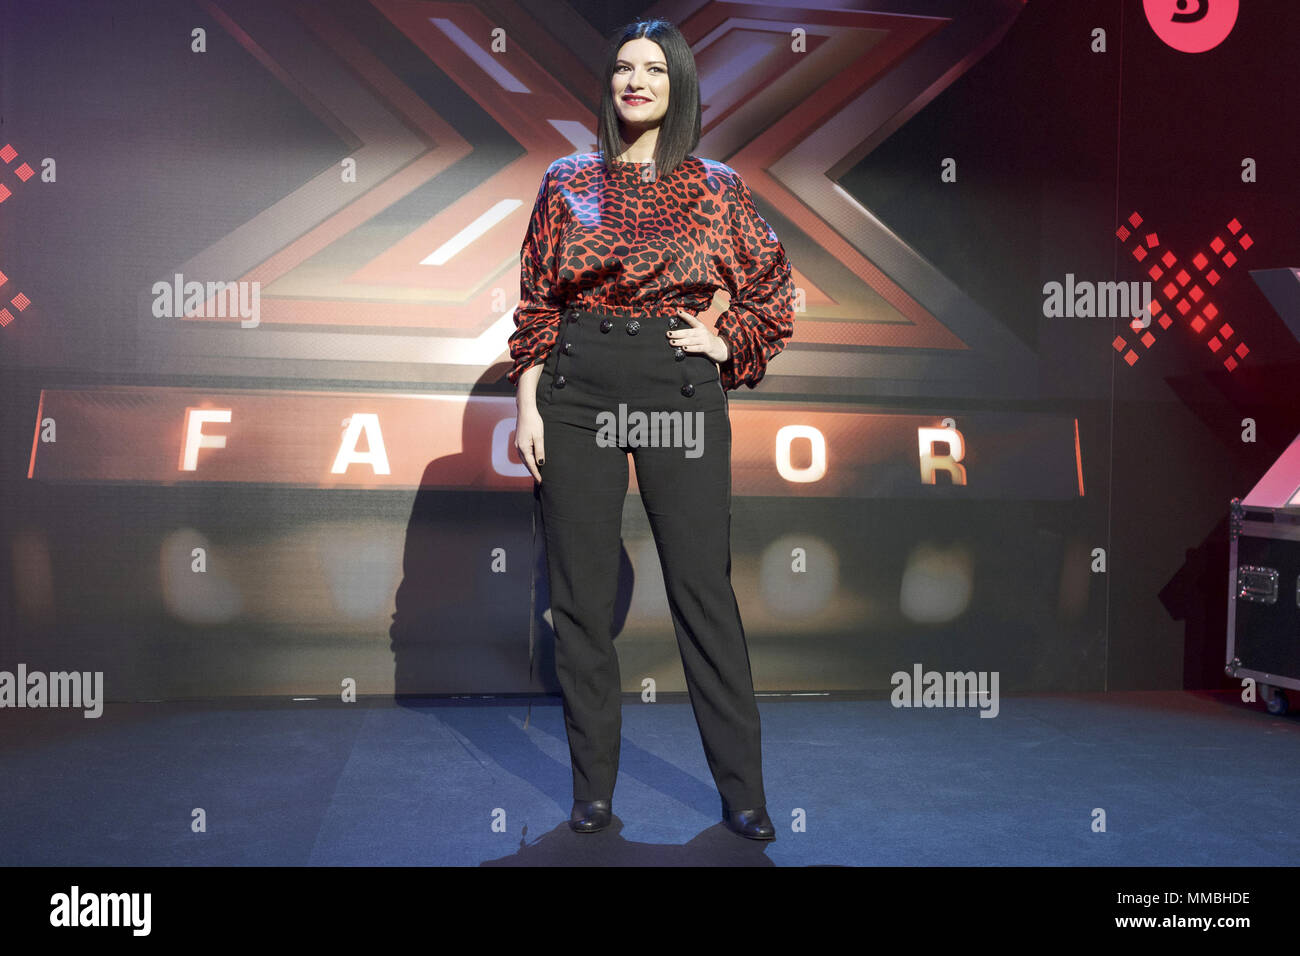 Laura Pausini attending a presentation of the third series of Spanish talent show 'Factor X', in which she appears as a judge, at Mediaset in Madrid, Spain.  Featuring: Laura Pausini Where: Madrid, Community of Madrid, Spain When: 09 Apr 2018 Credit: Oscar Gonzalez/WENN.com Stock Photo